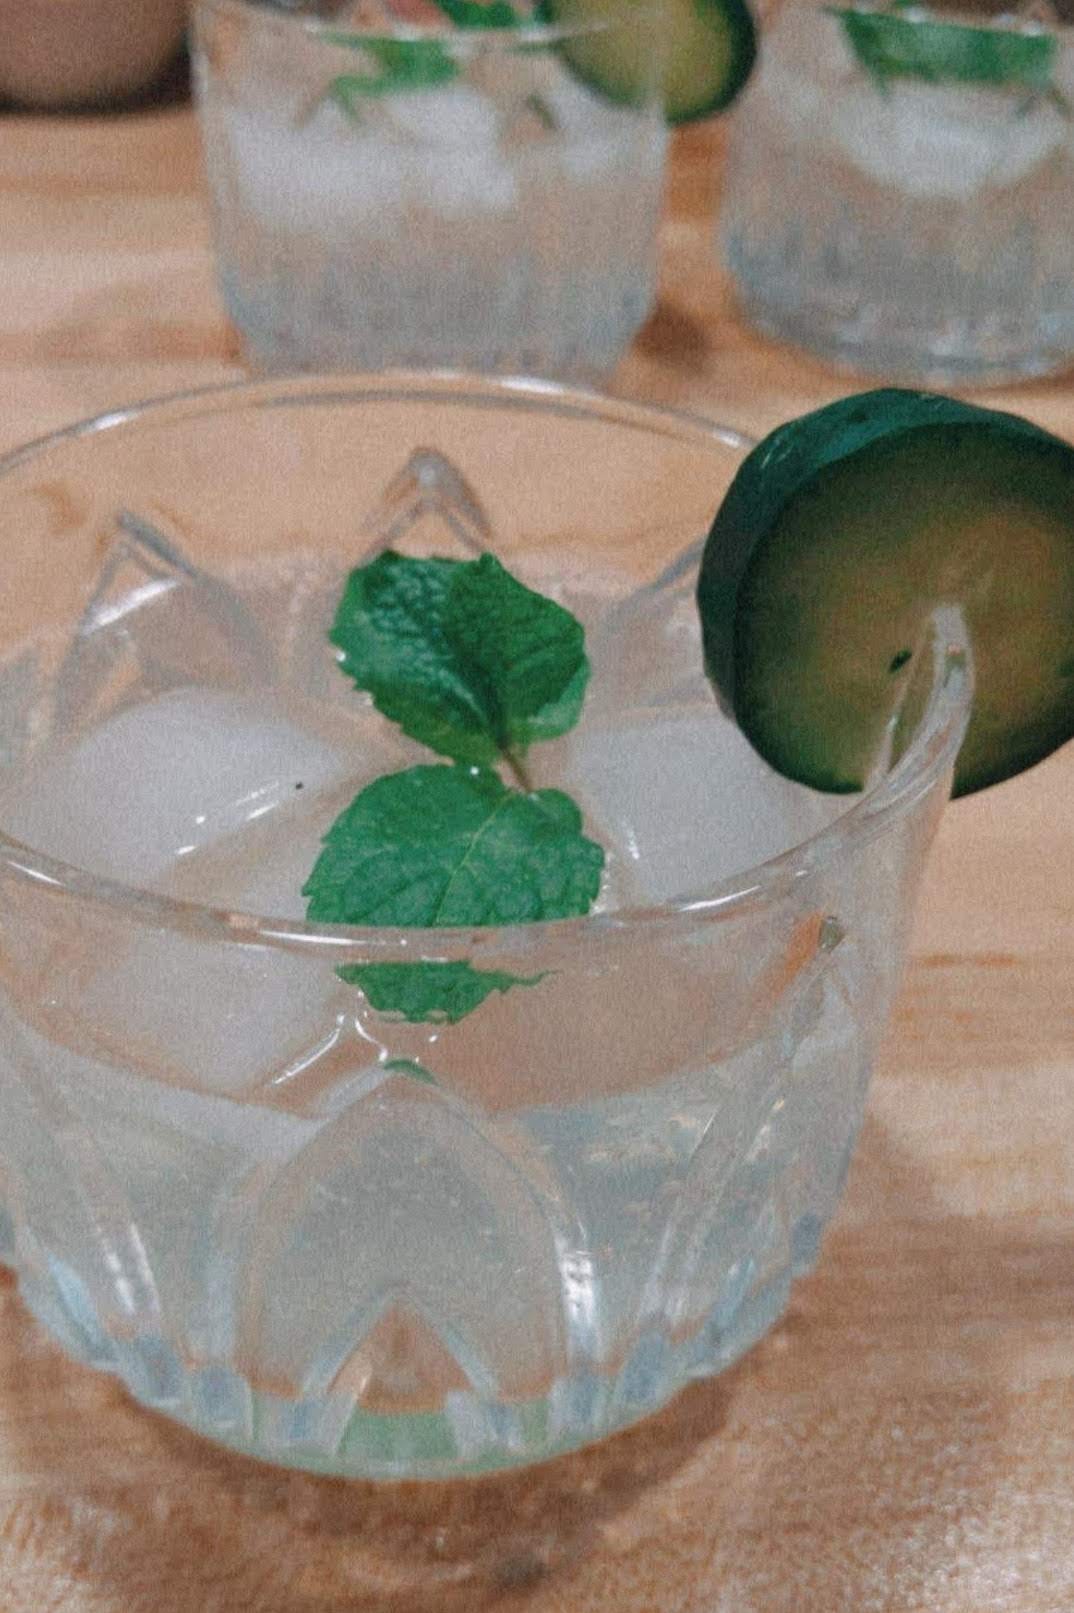 a clear glass filled with bubbly clear liquid, topped with a green circular cucumber and sprig of mint for garnish